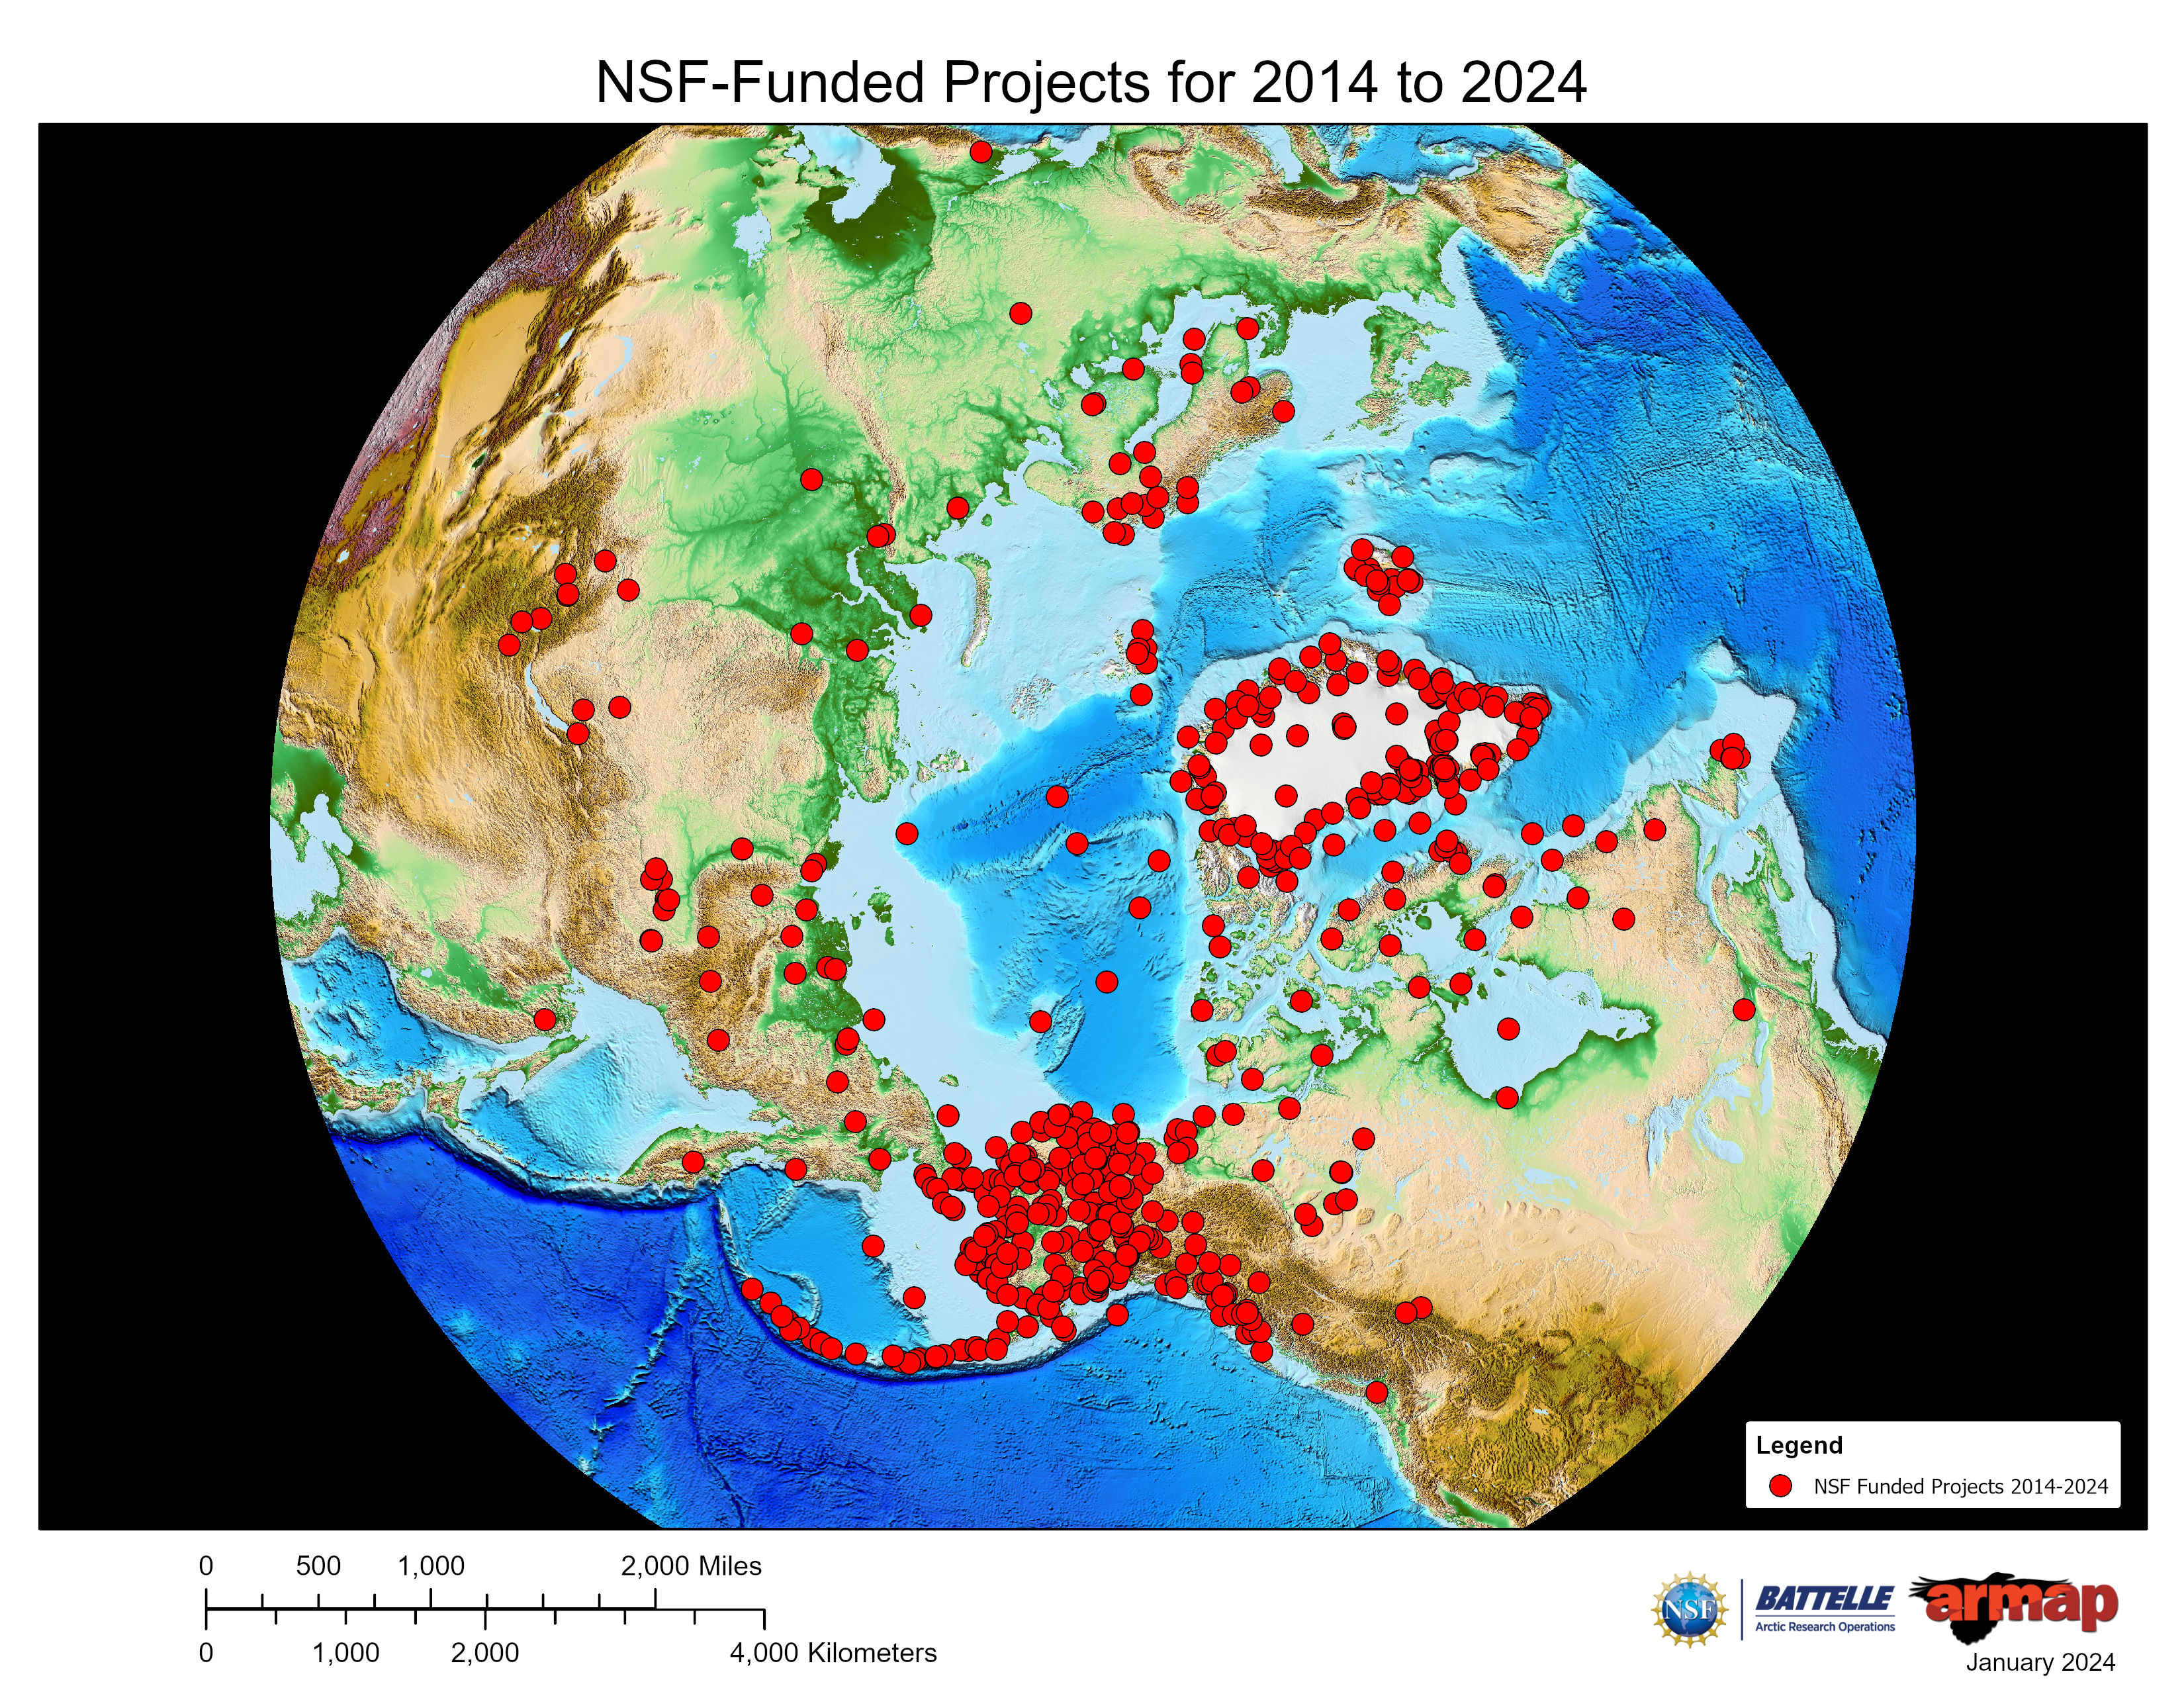 NSF-Funded Projects, Past 10 Years